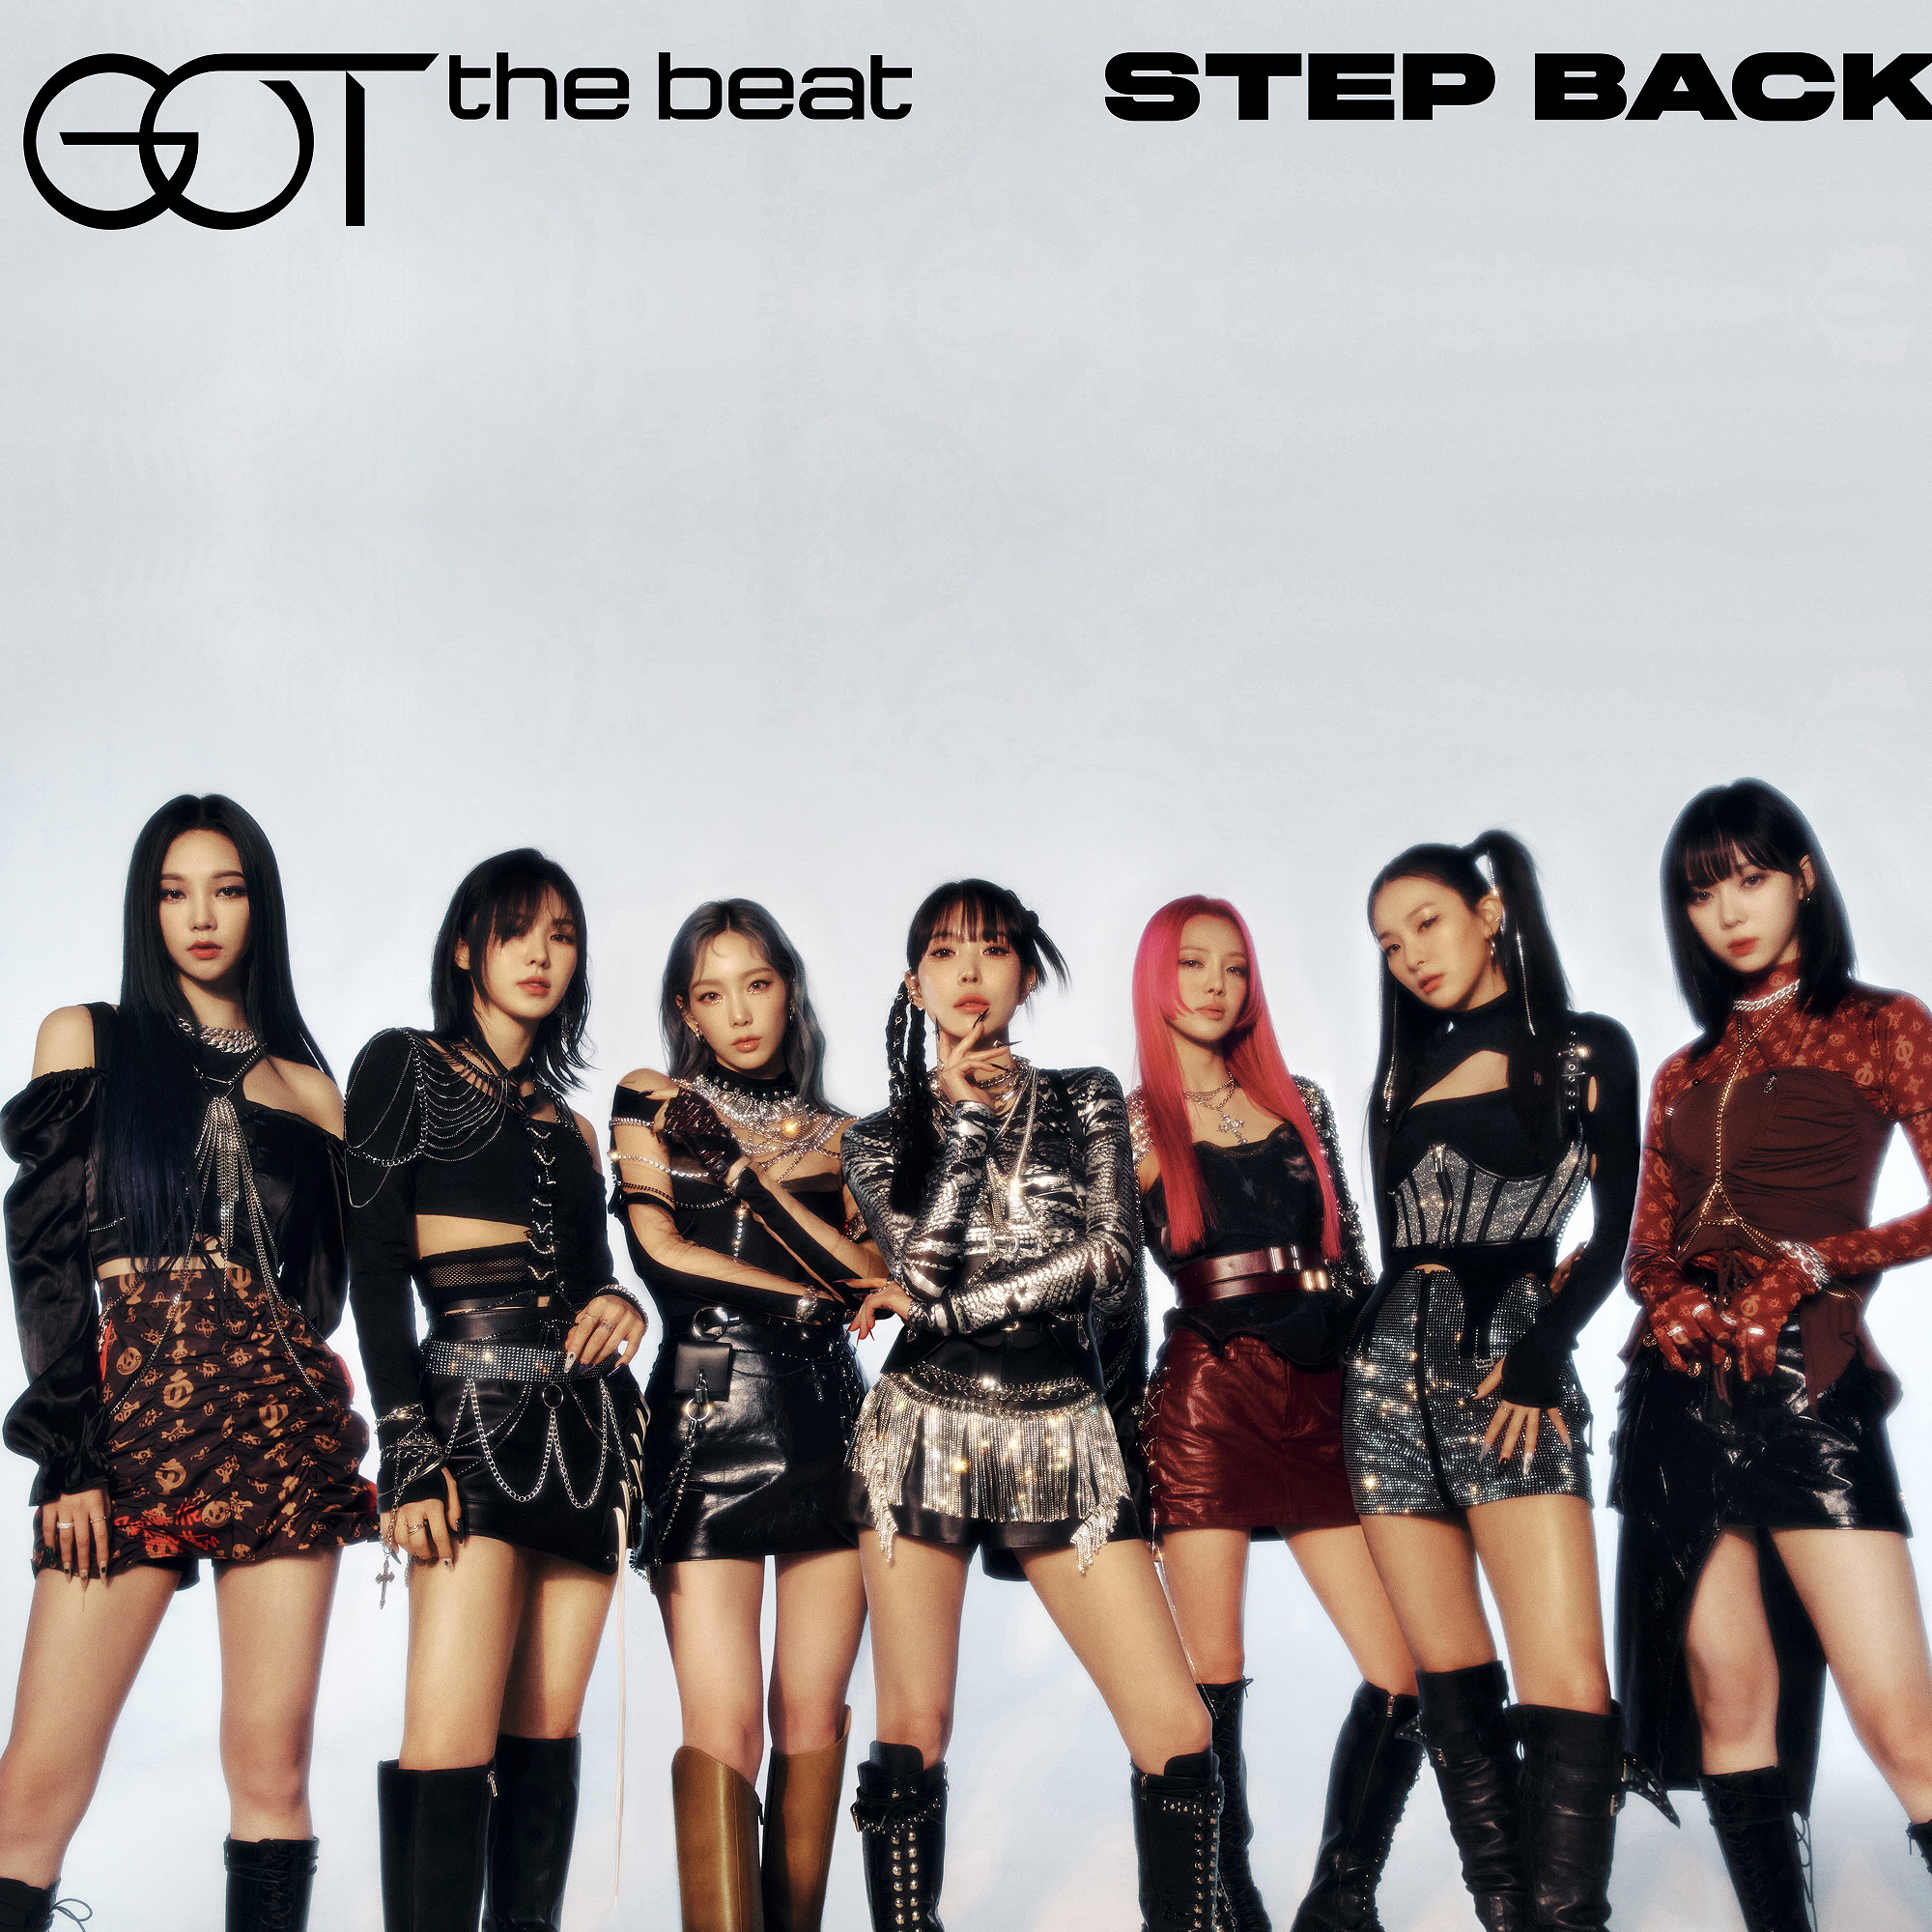 GOT the beat Step Back Cover